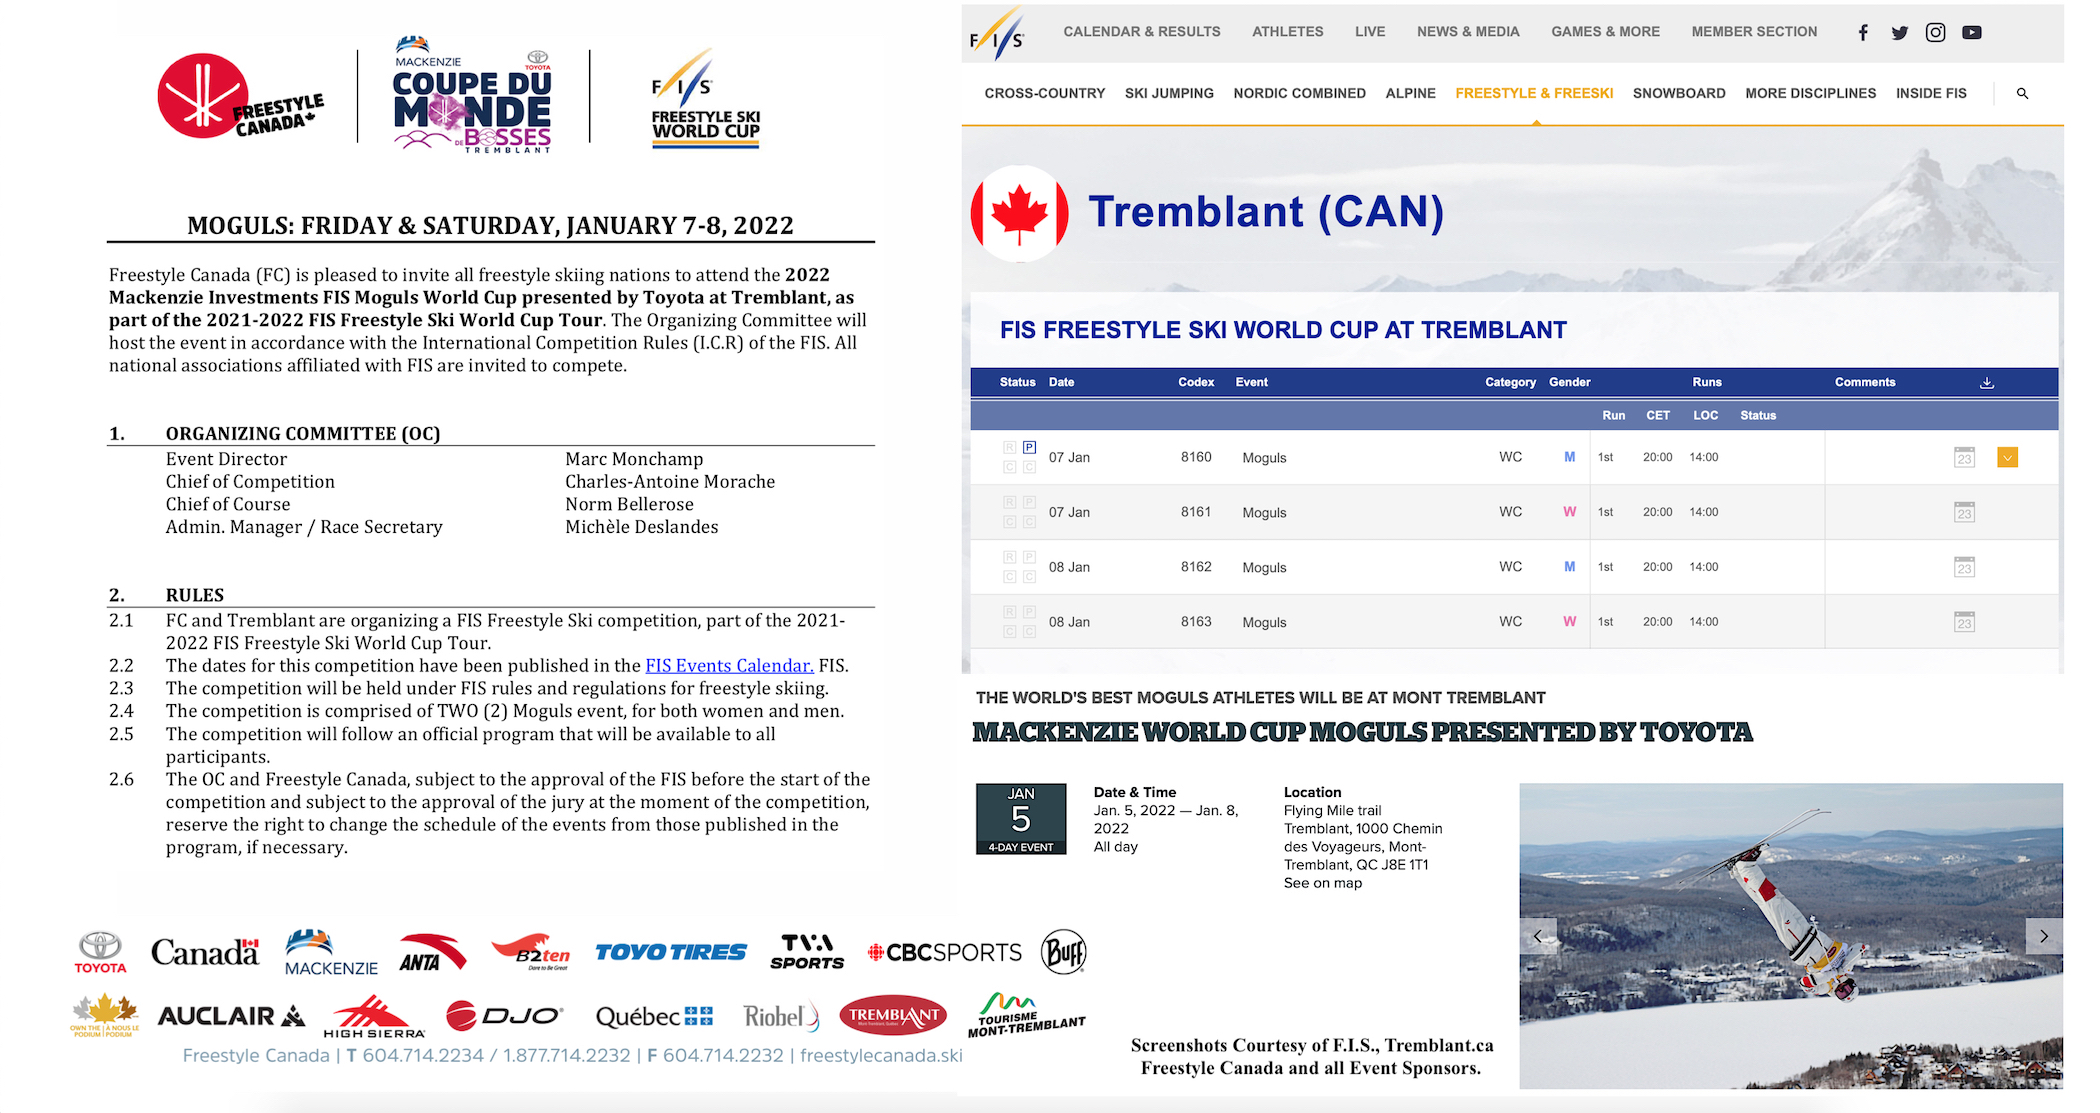 12.29.21.Tremblant.World.Cup.F.I.S.Freestyle.Mogul.Jan.7.8.2022.Event.Detail.a.jpg